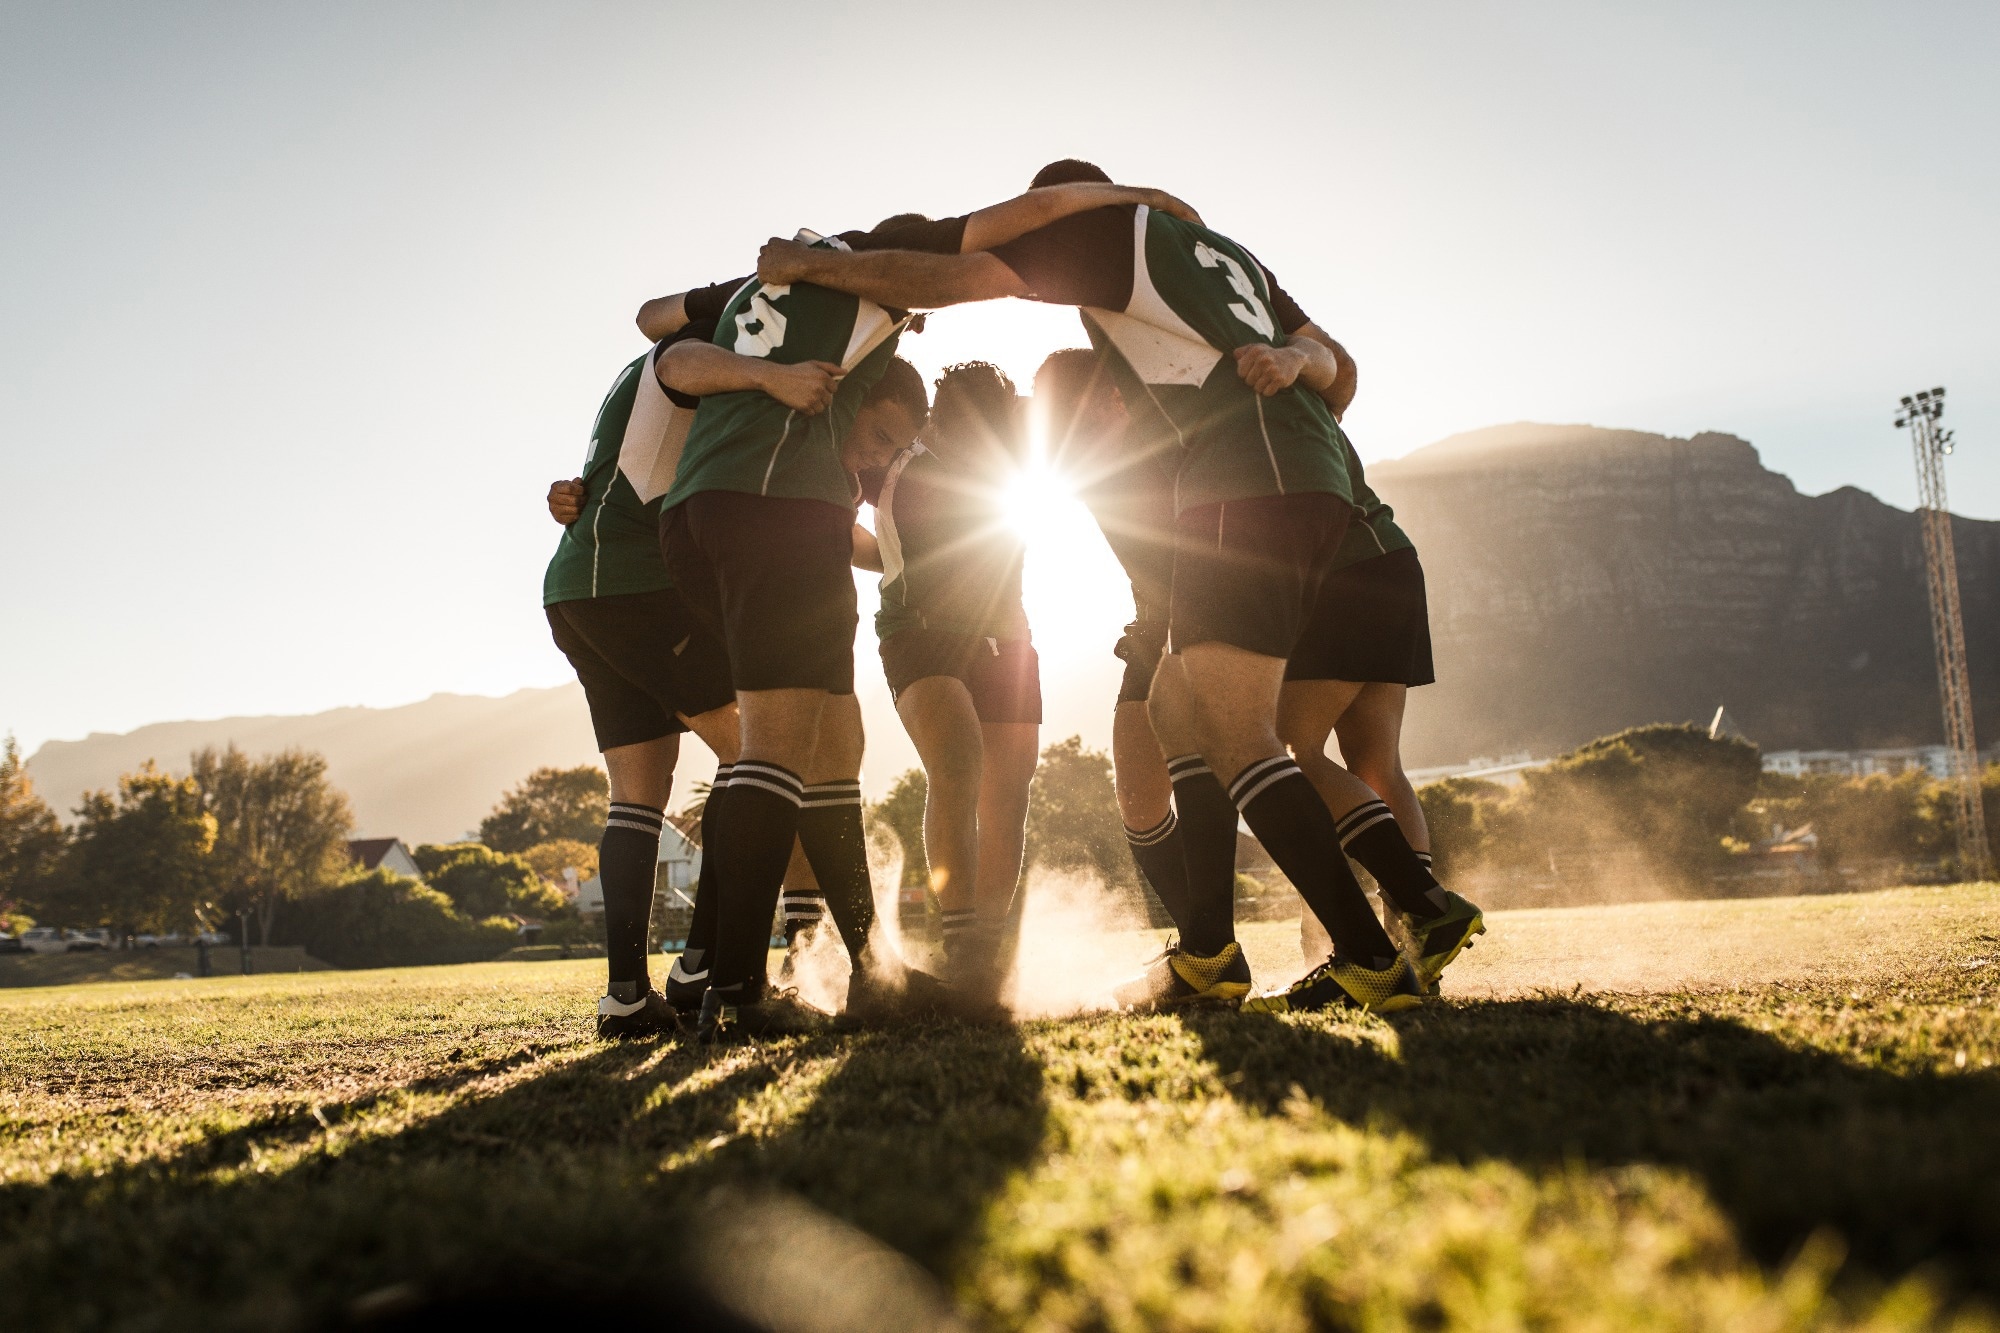 Seasonal training shifts don’t shake rugby players’ heart health, finds study